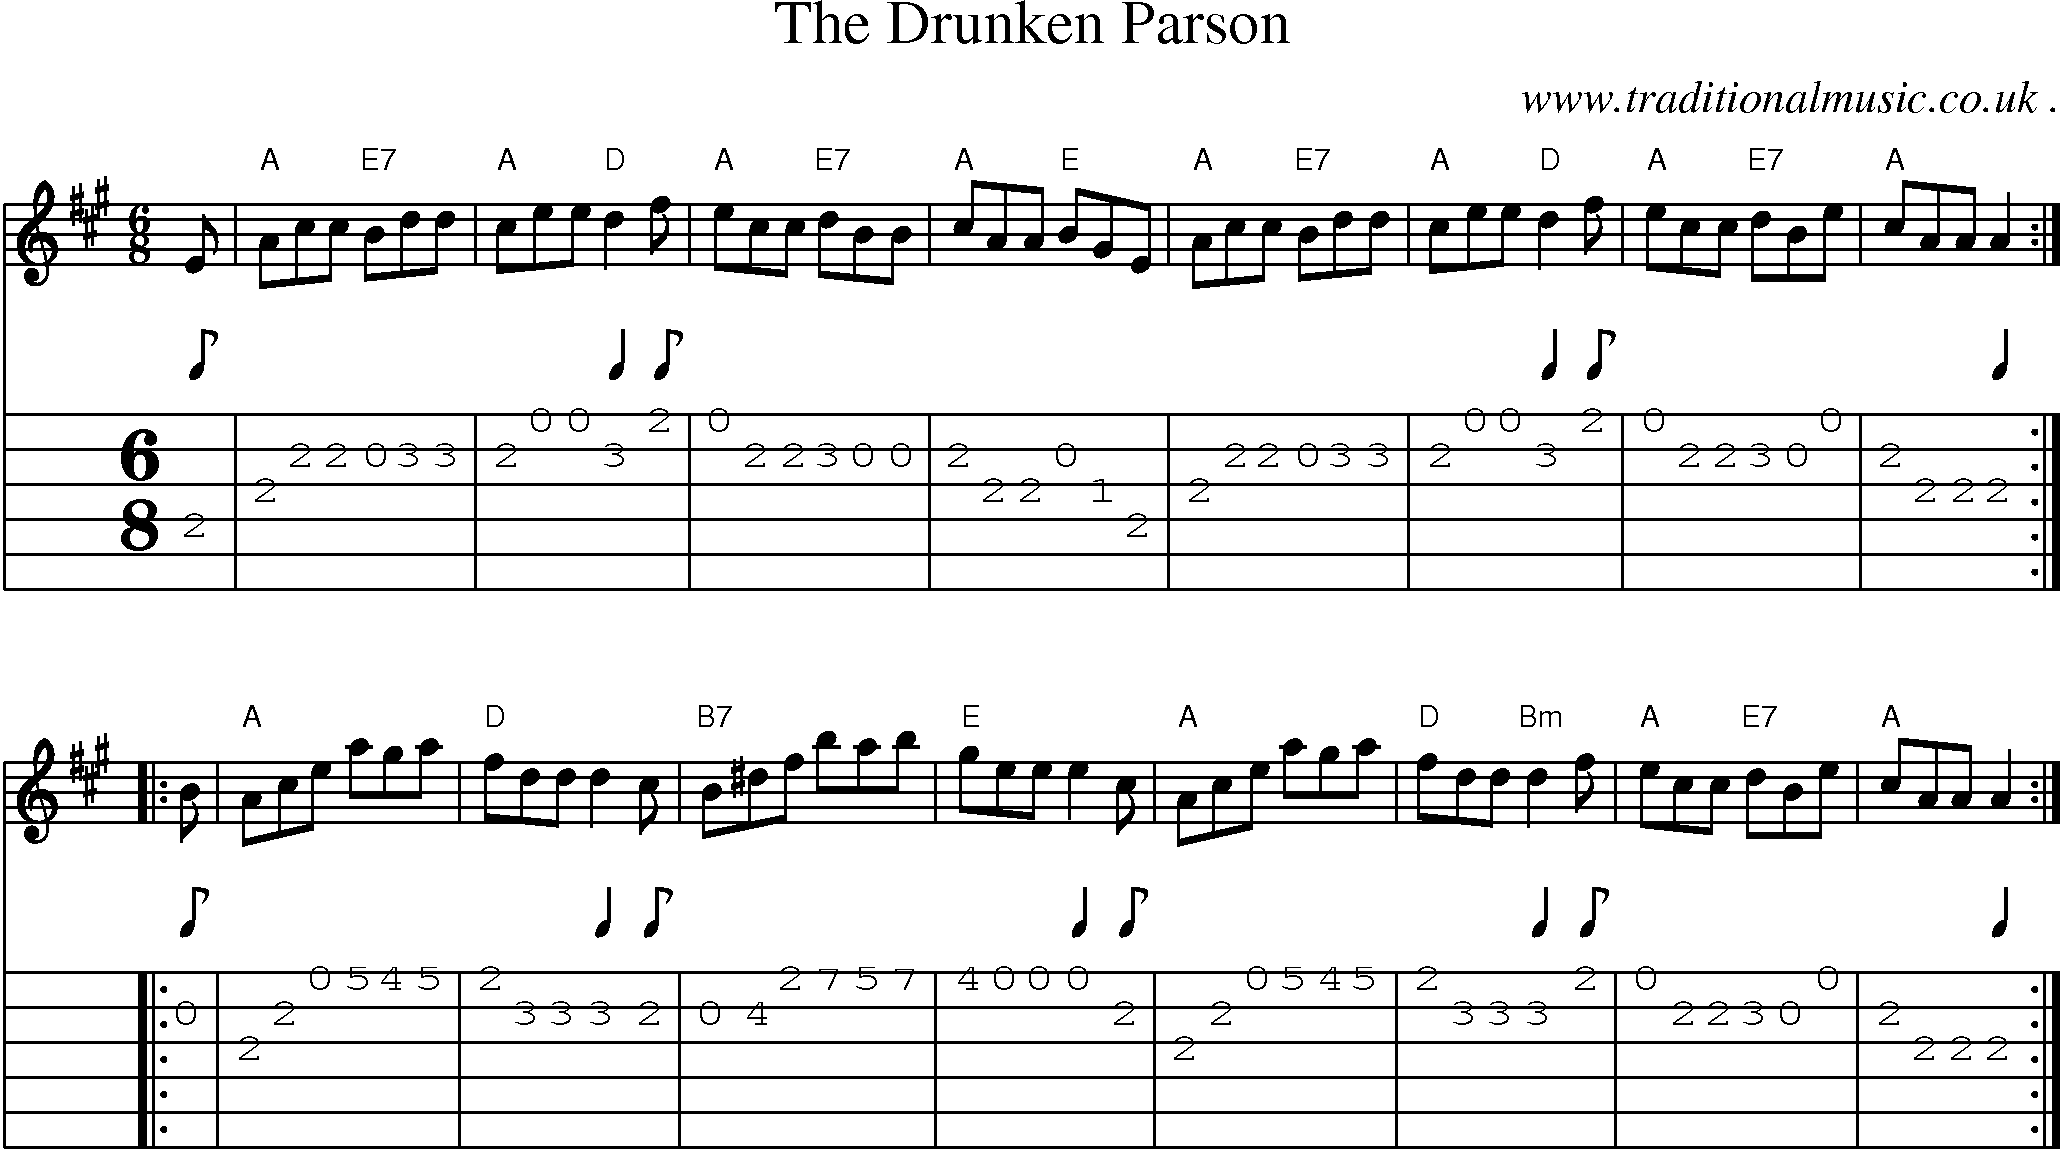 Sheet-music  score, Chords and Guitar Tabs for The Drunken Parson